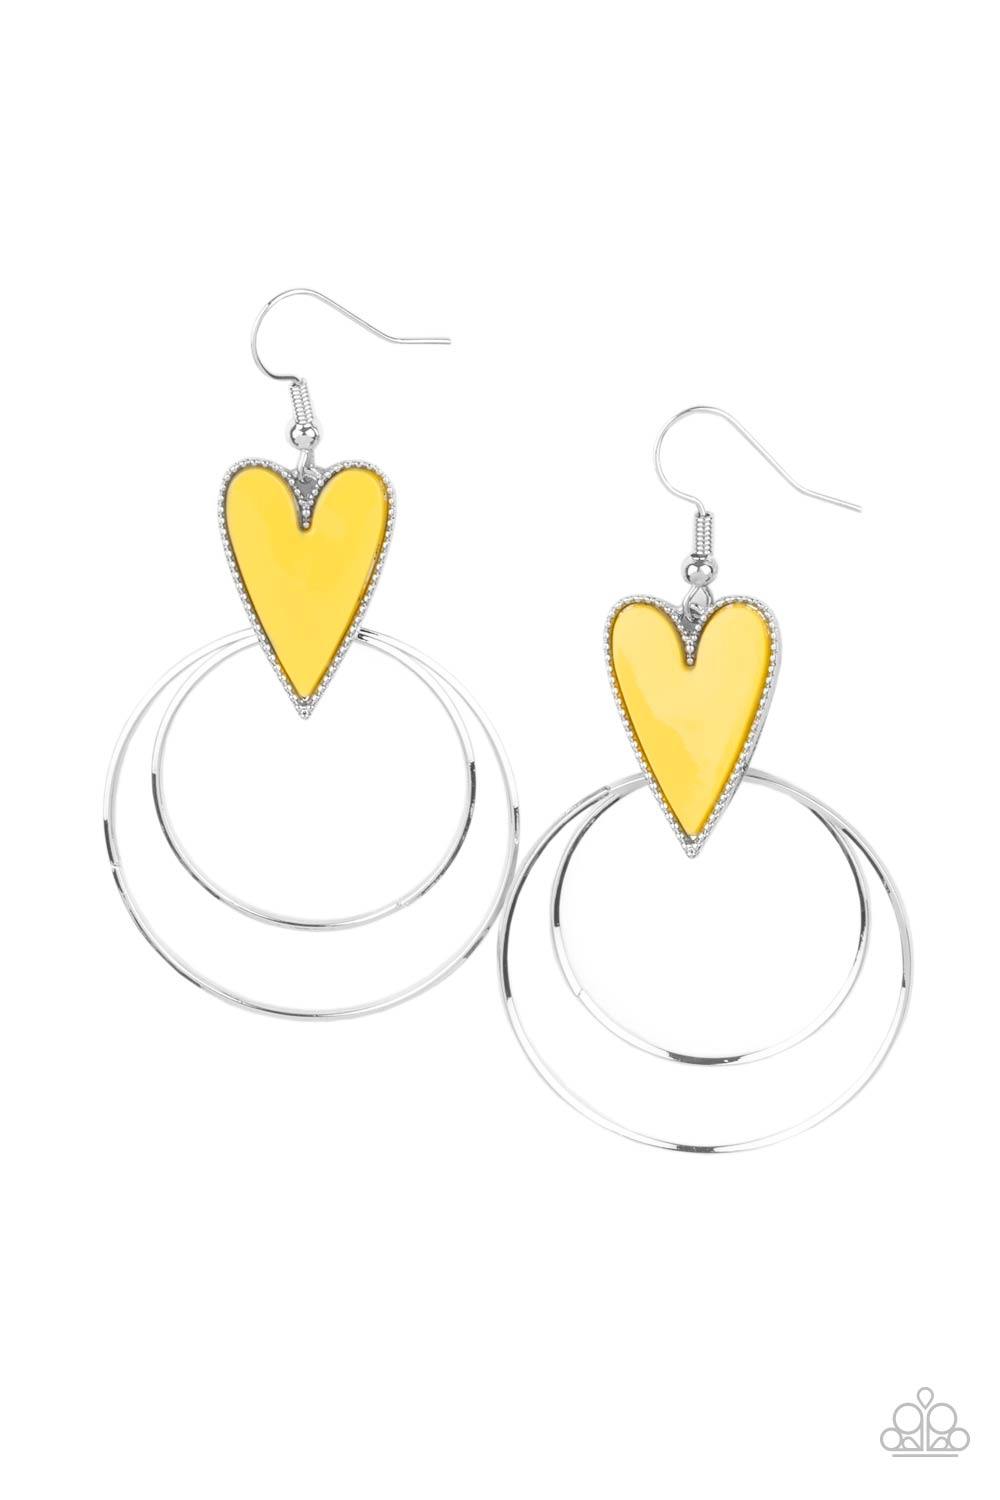 Happily Ever Hearts - Yellow-Paparazzi - Flauless Bling Boutique